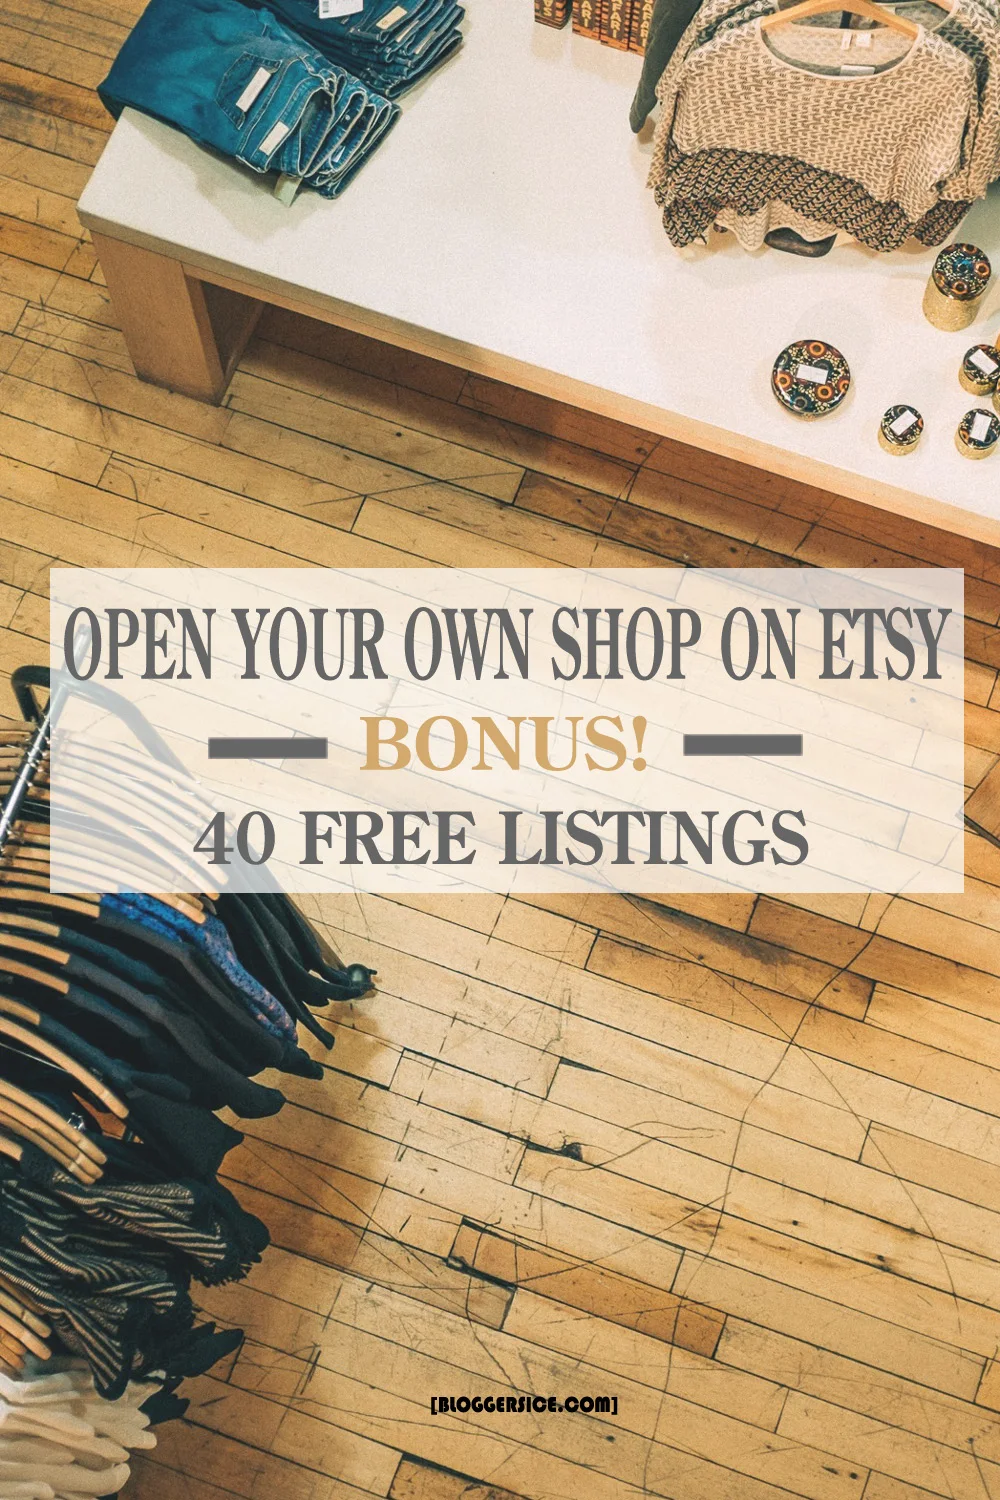 Why and How to Open Your Own Shop on Etsy? Bonus! 40 Free Listings.